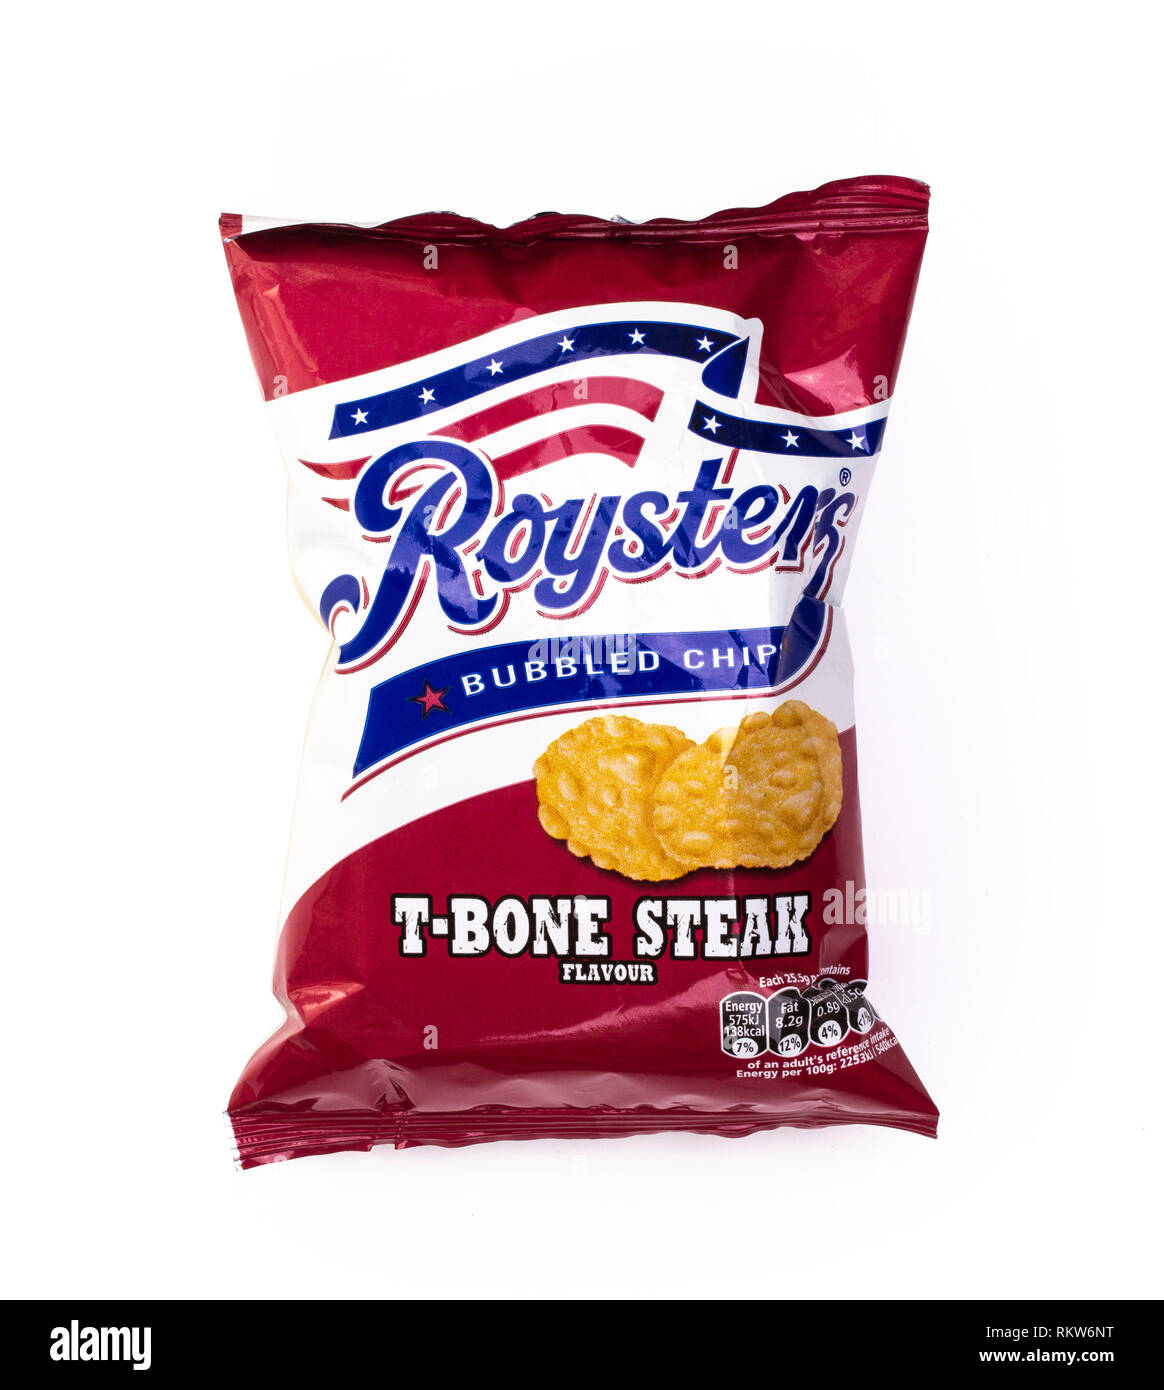 SWINDON, UK - FEBUARY 12, 2019: Roysters T-Bone Steak flavour bubbled chips on a white background Stock Photo